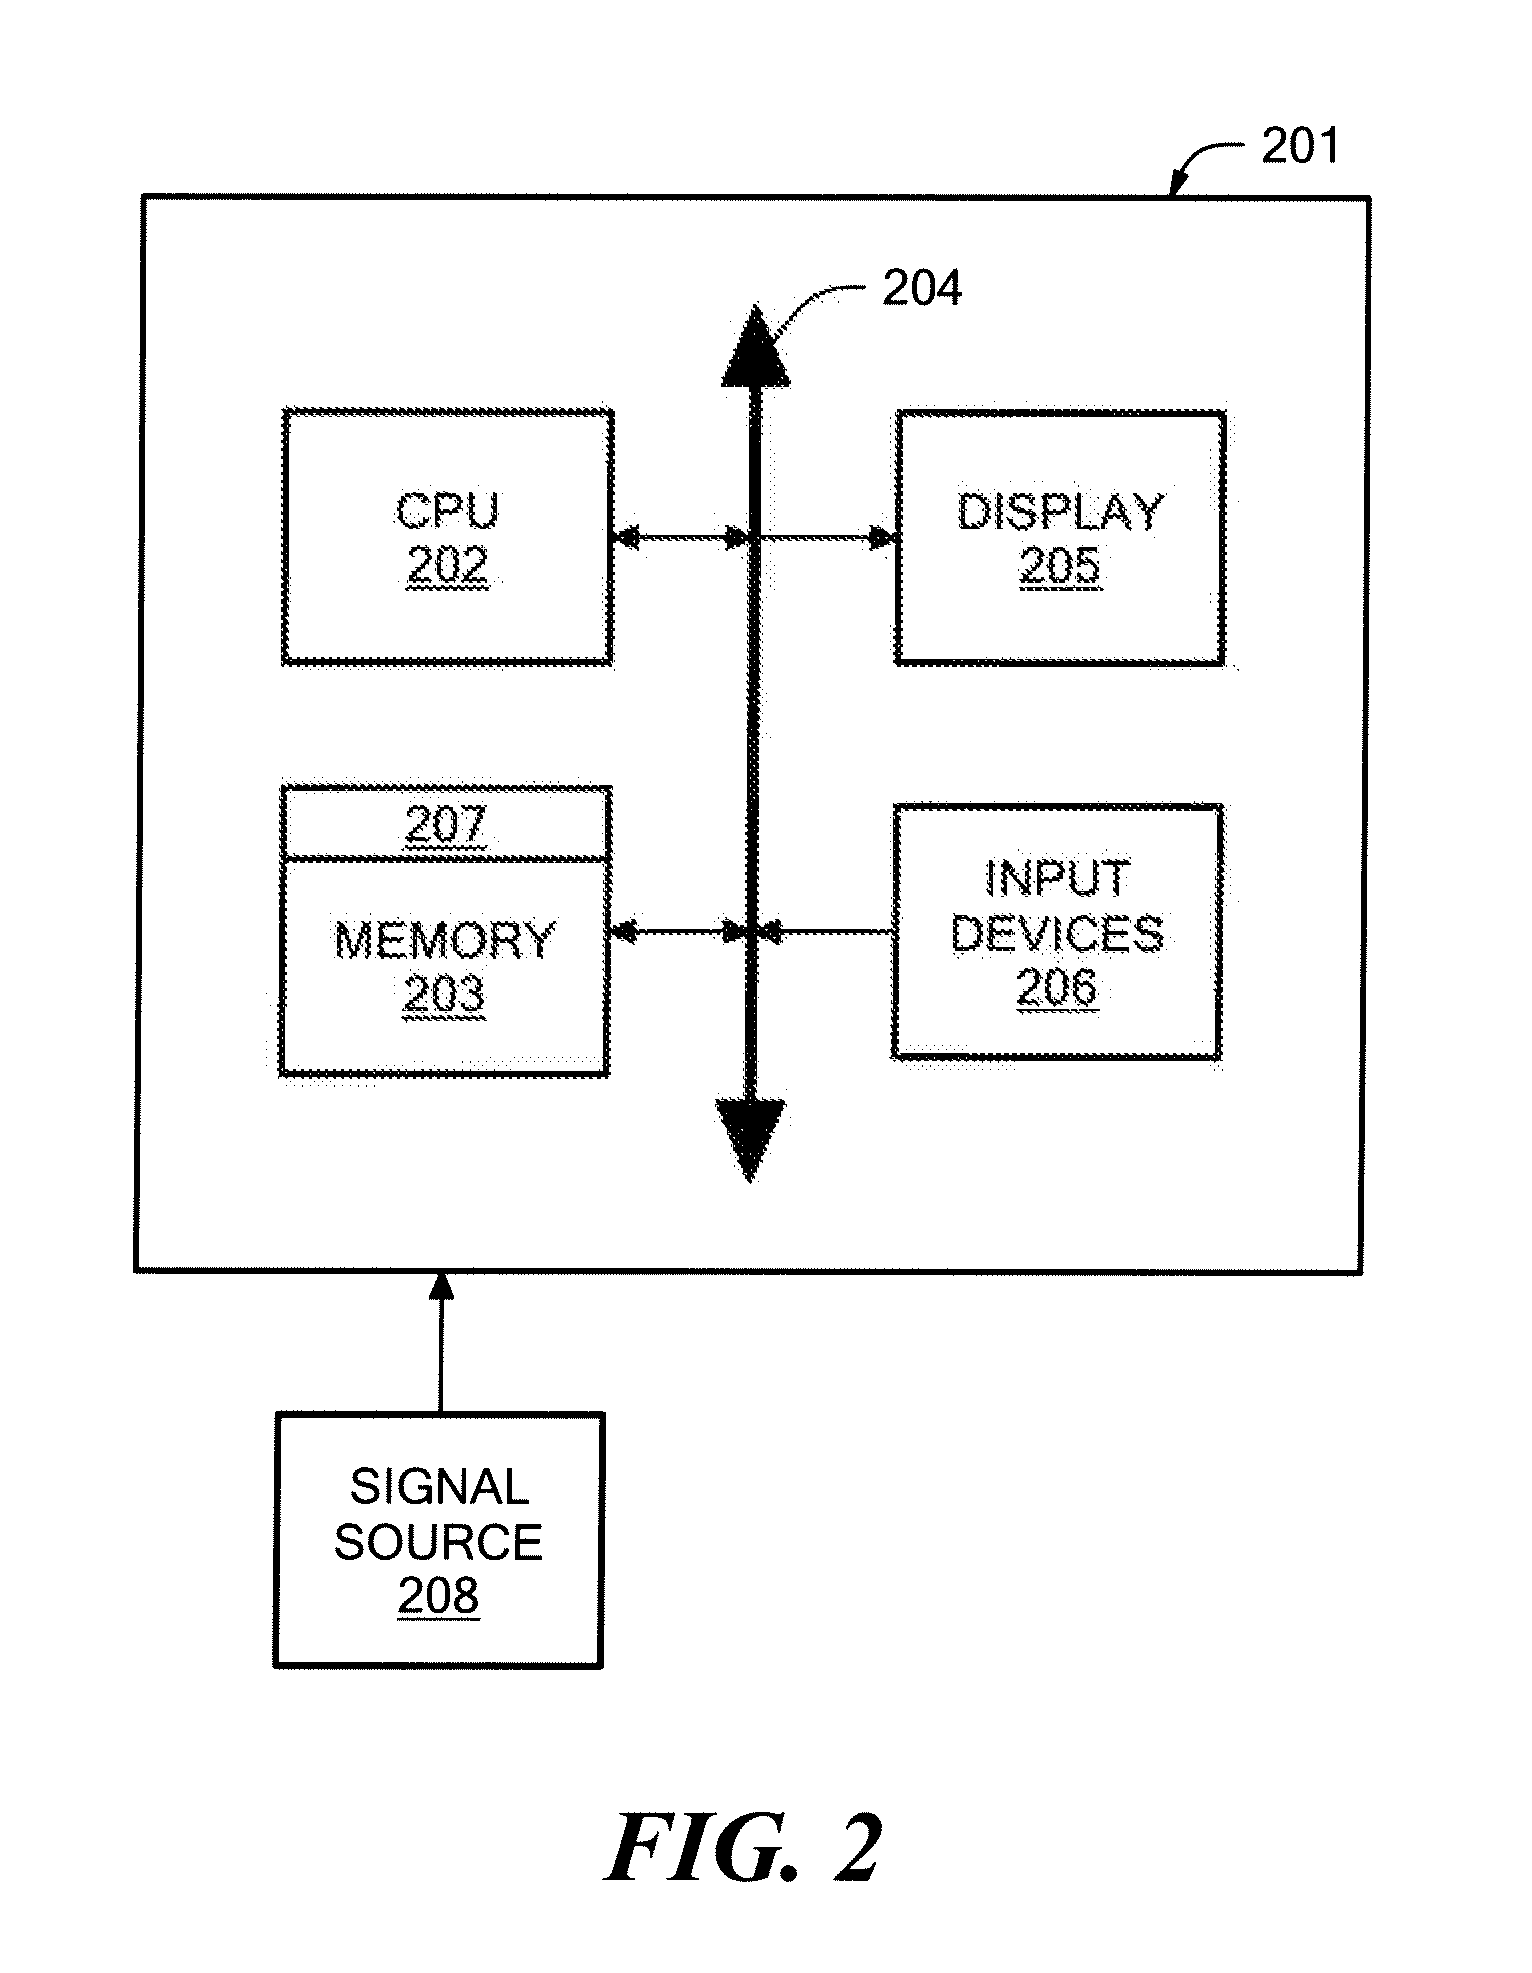 Method for Automatic Detection and Tracking of Multiple Objects